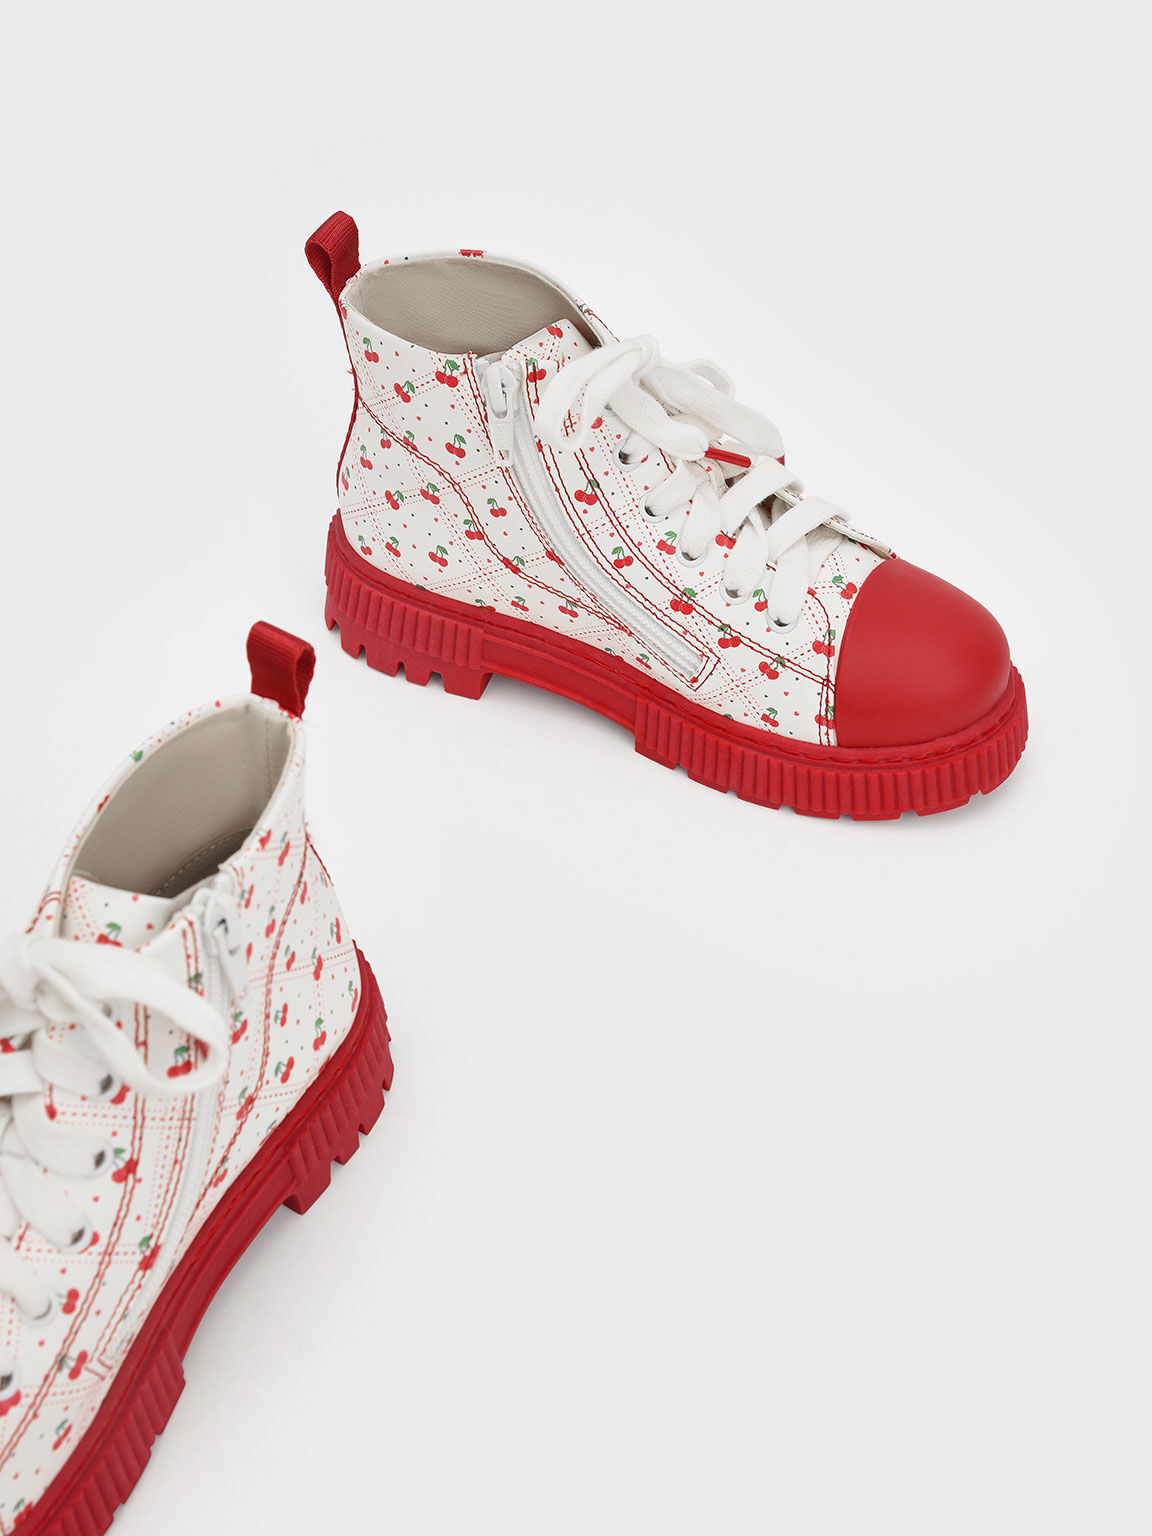 Girls' Cherry-Print High-Top Sneaker Boots, Red, hi-res